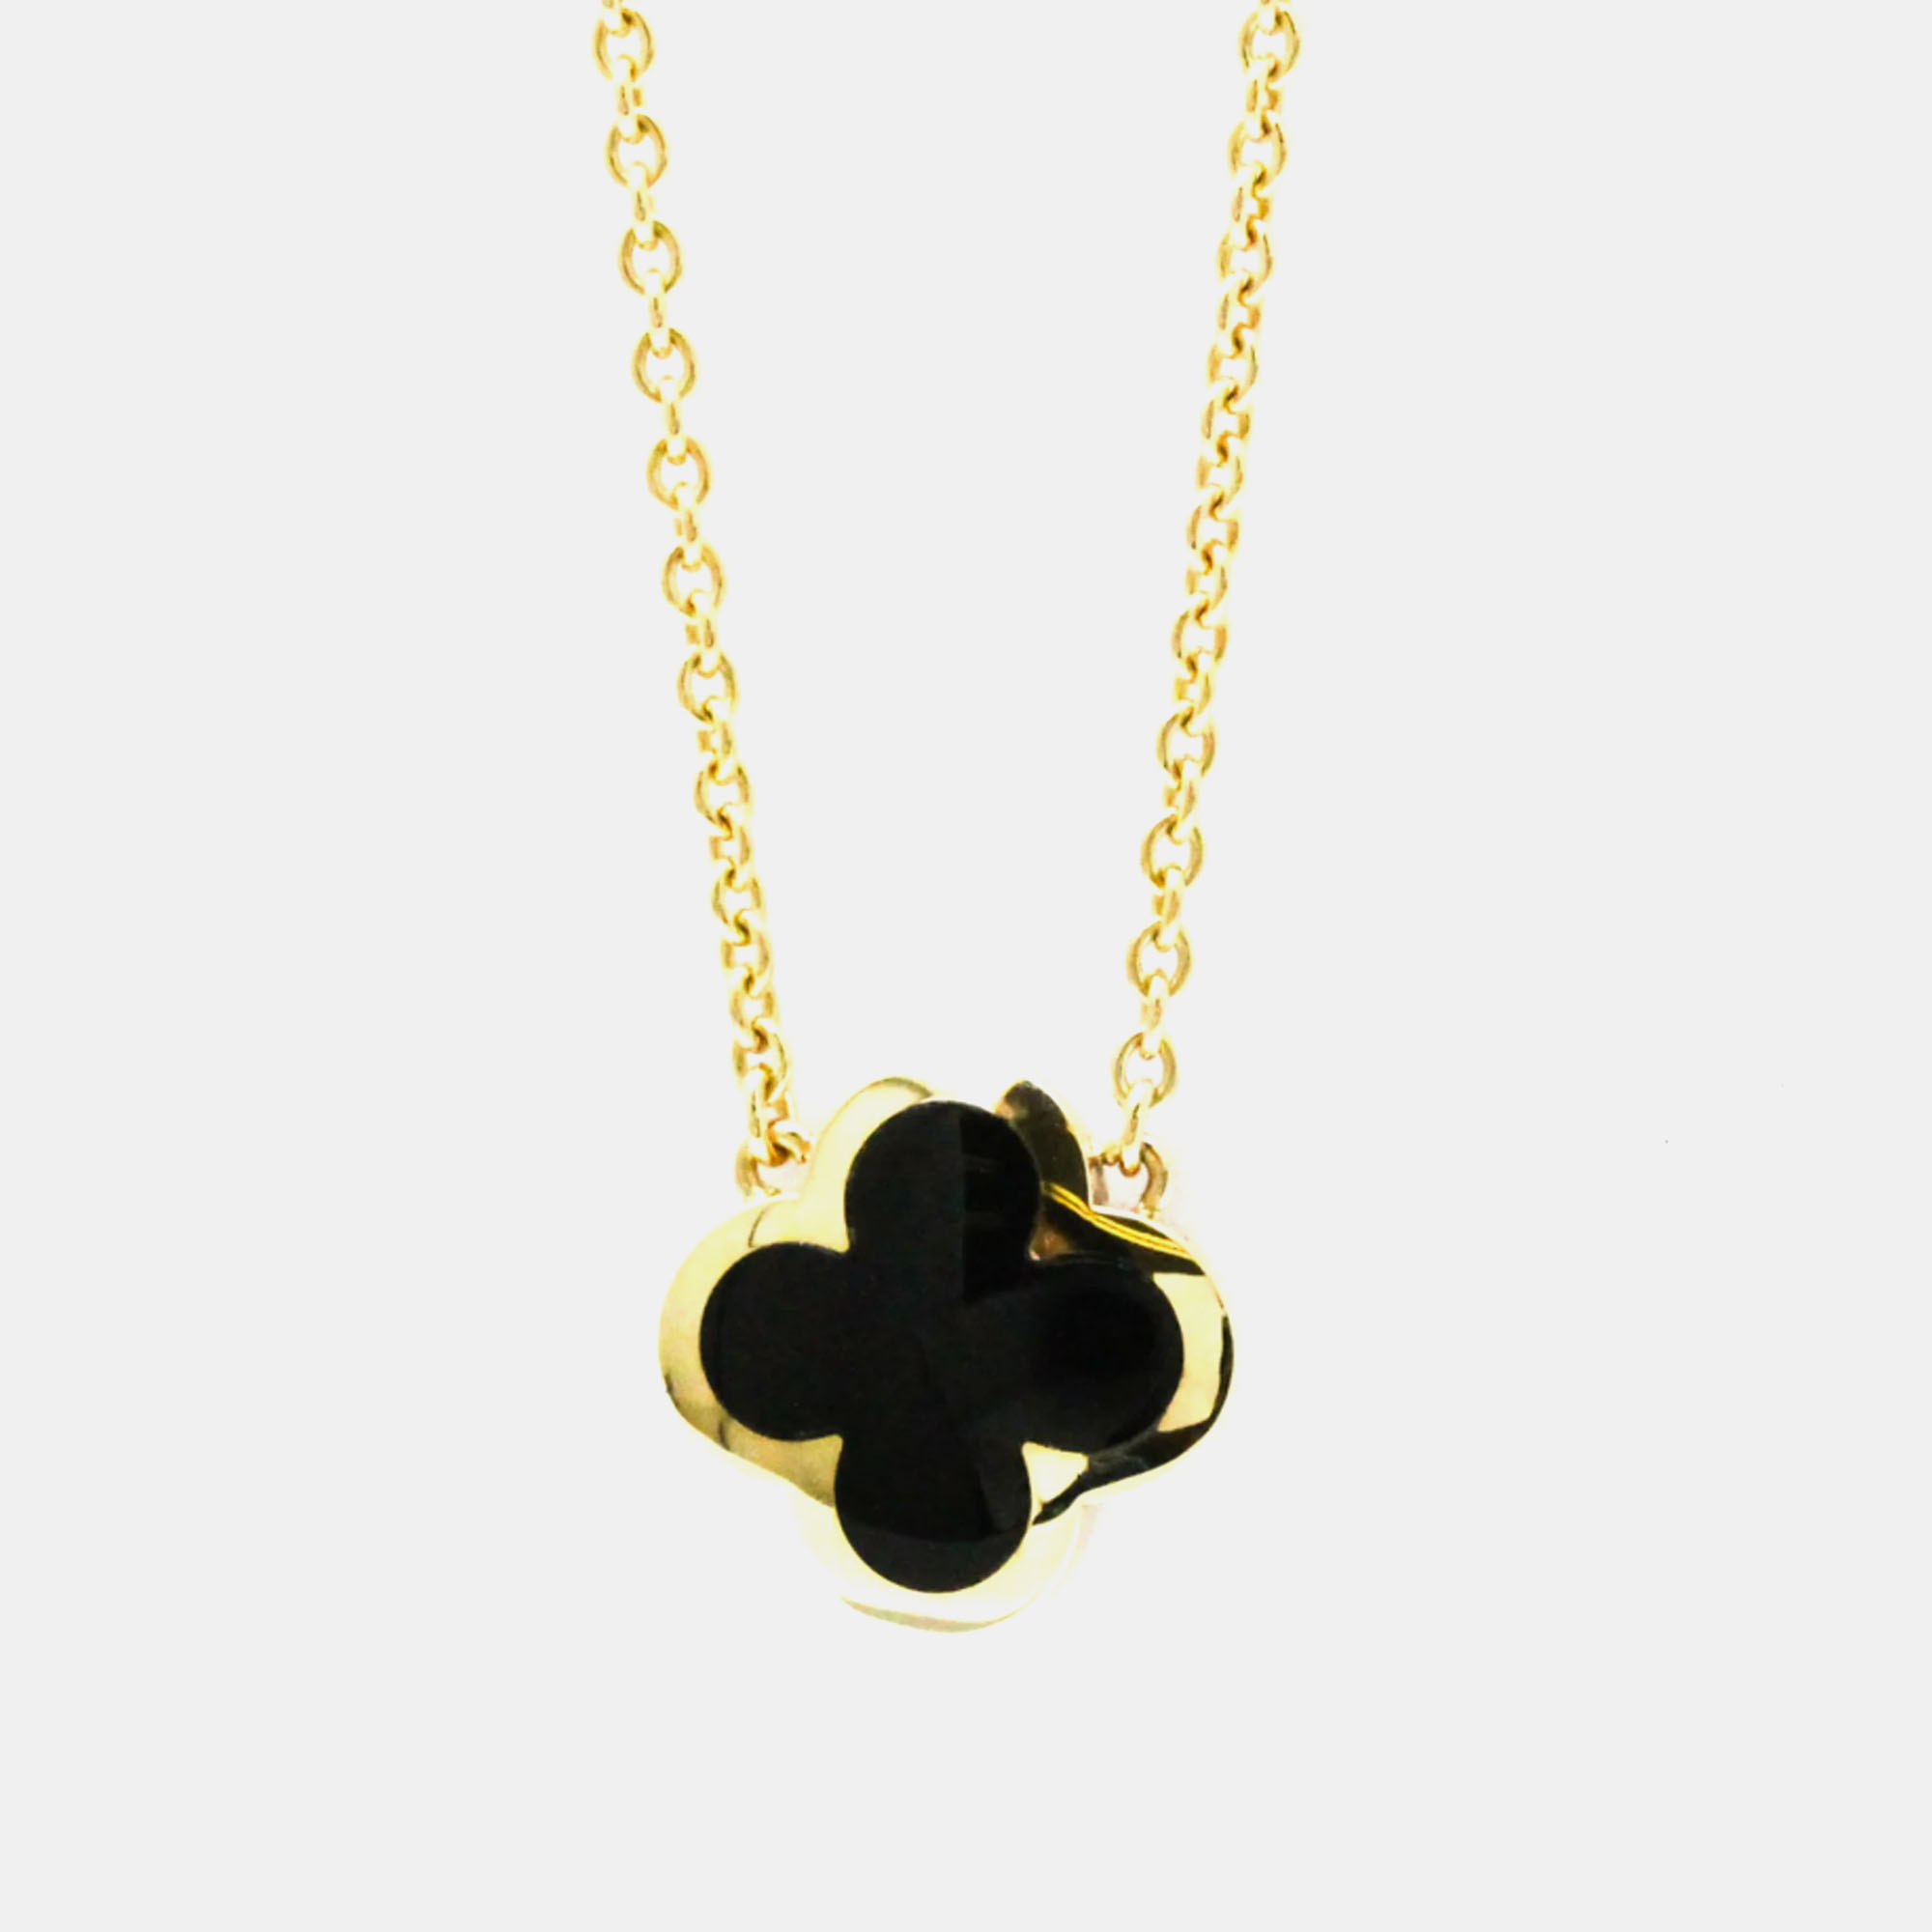 Van cleef & arpels 18k yellow gold and onyx pure alhambra pendant necklace